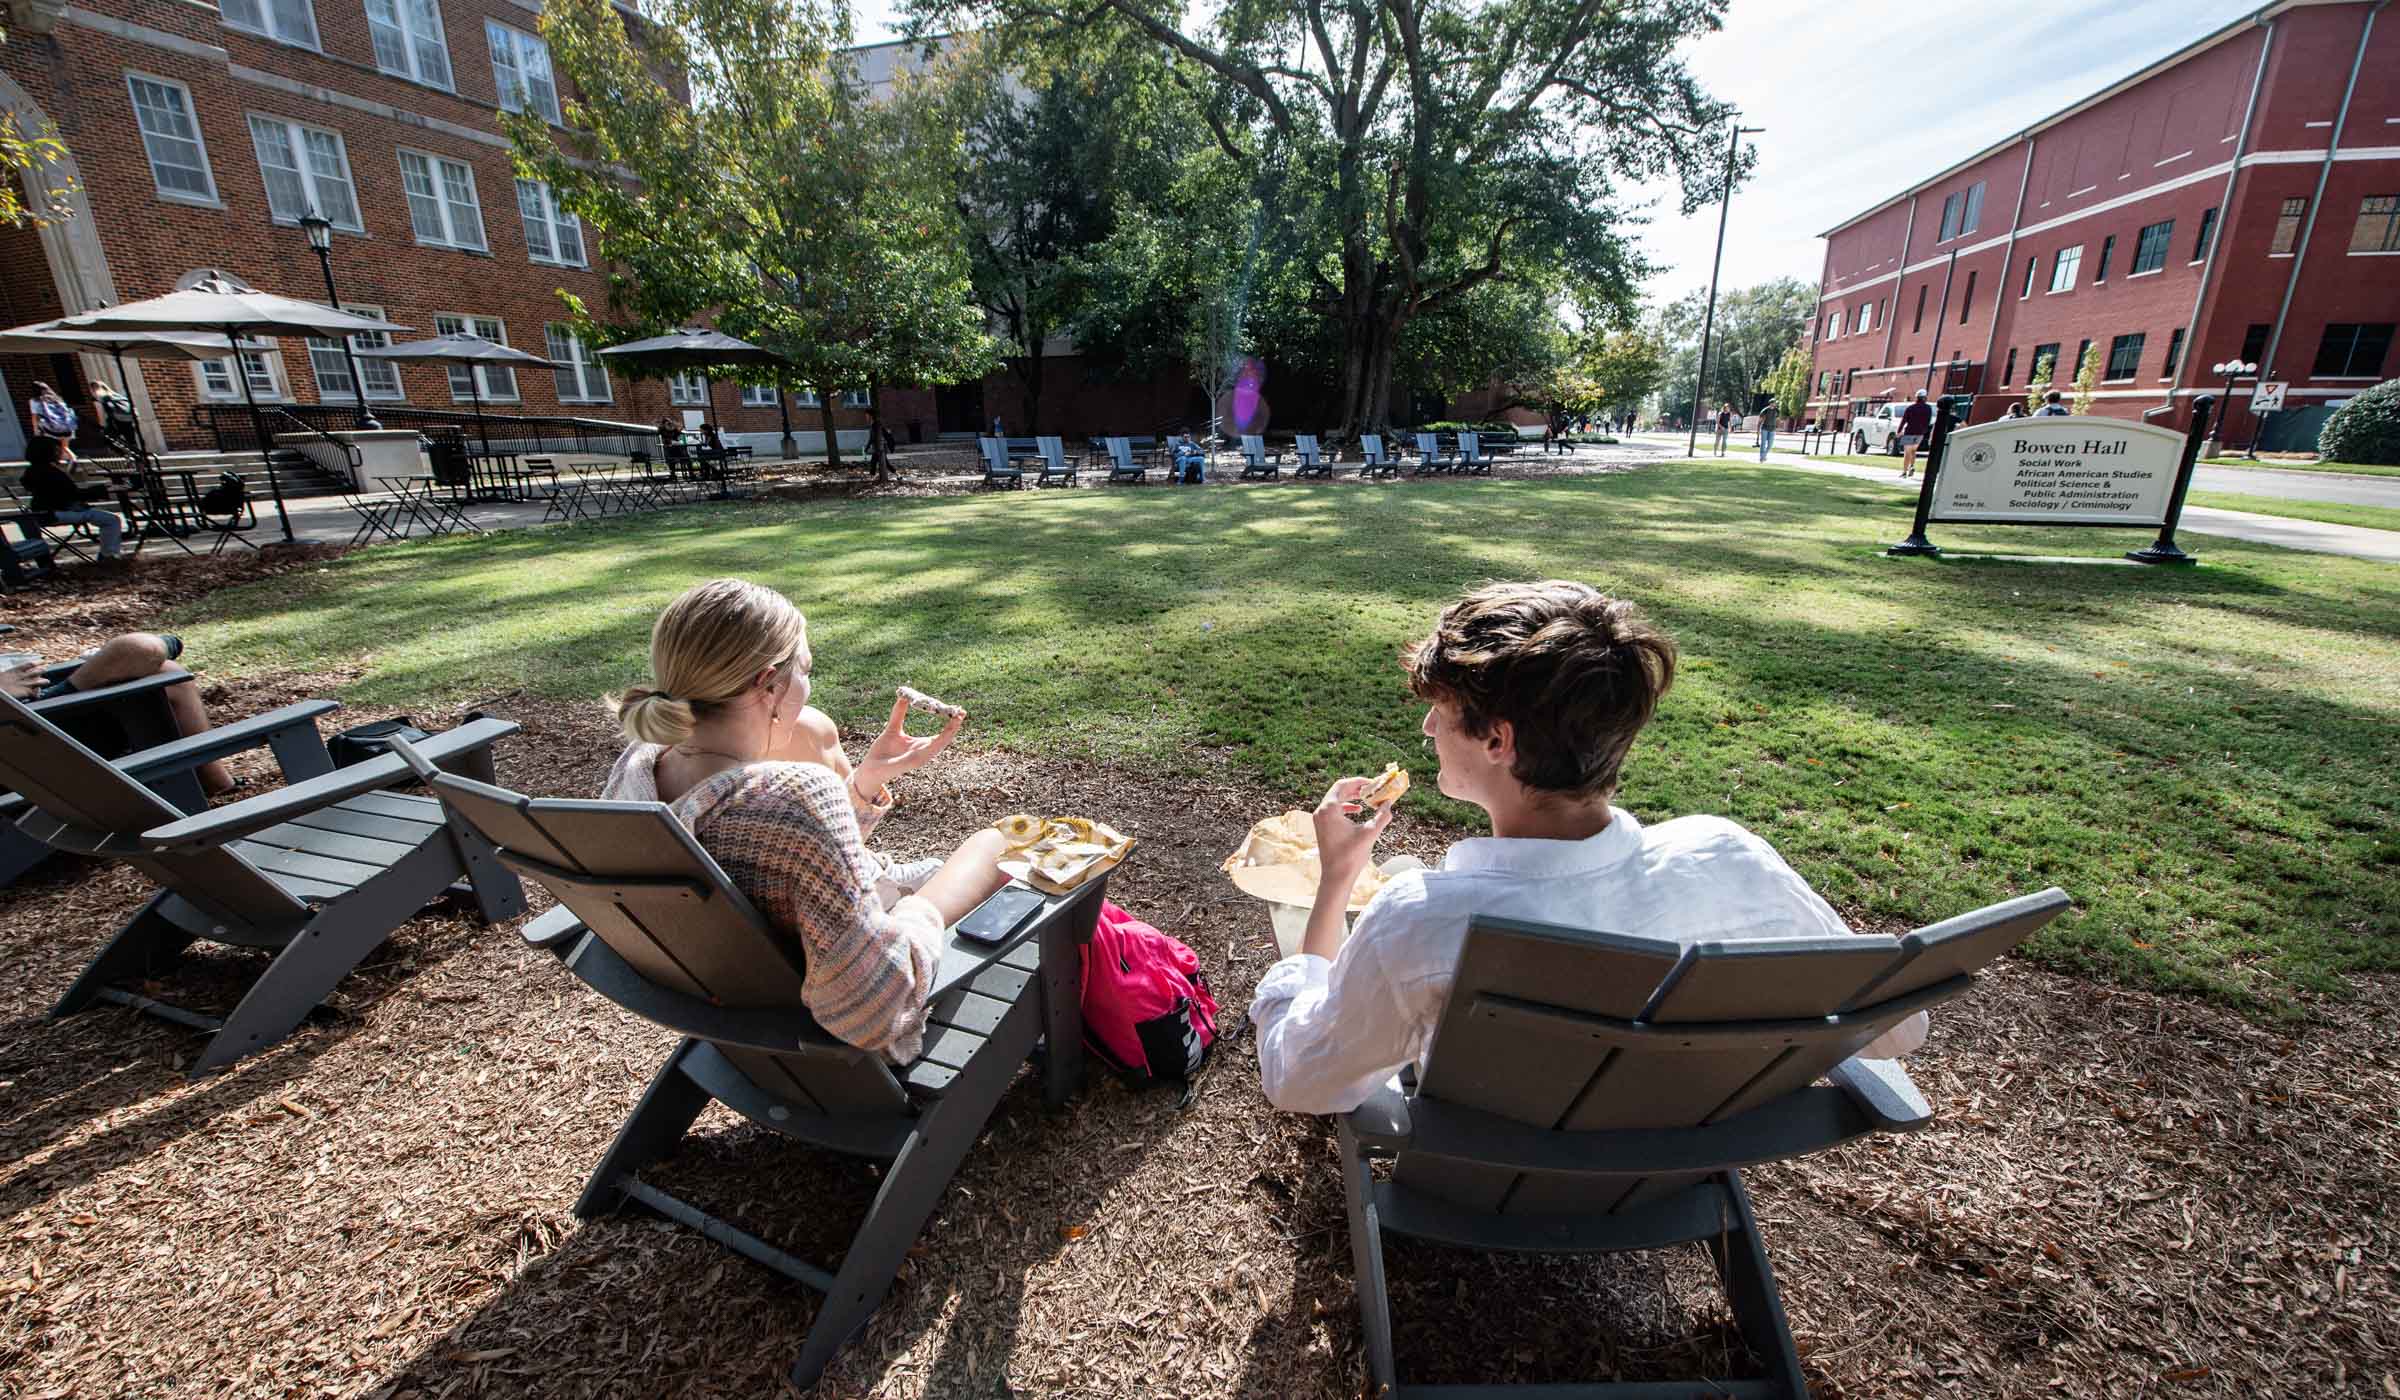 Two students sit in Adirondack chairs in the sunshine outside Bowen Hall.